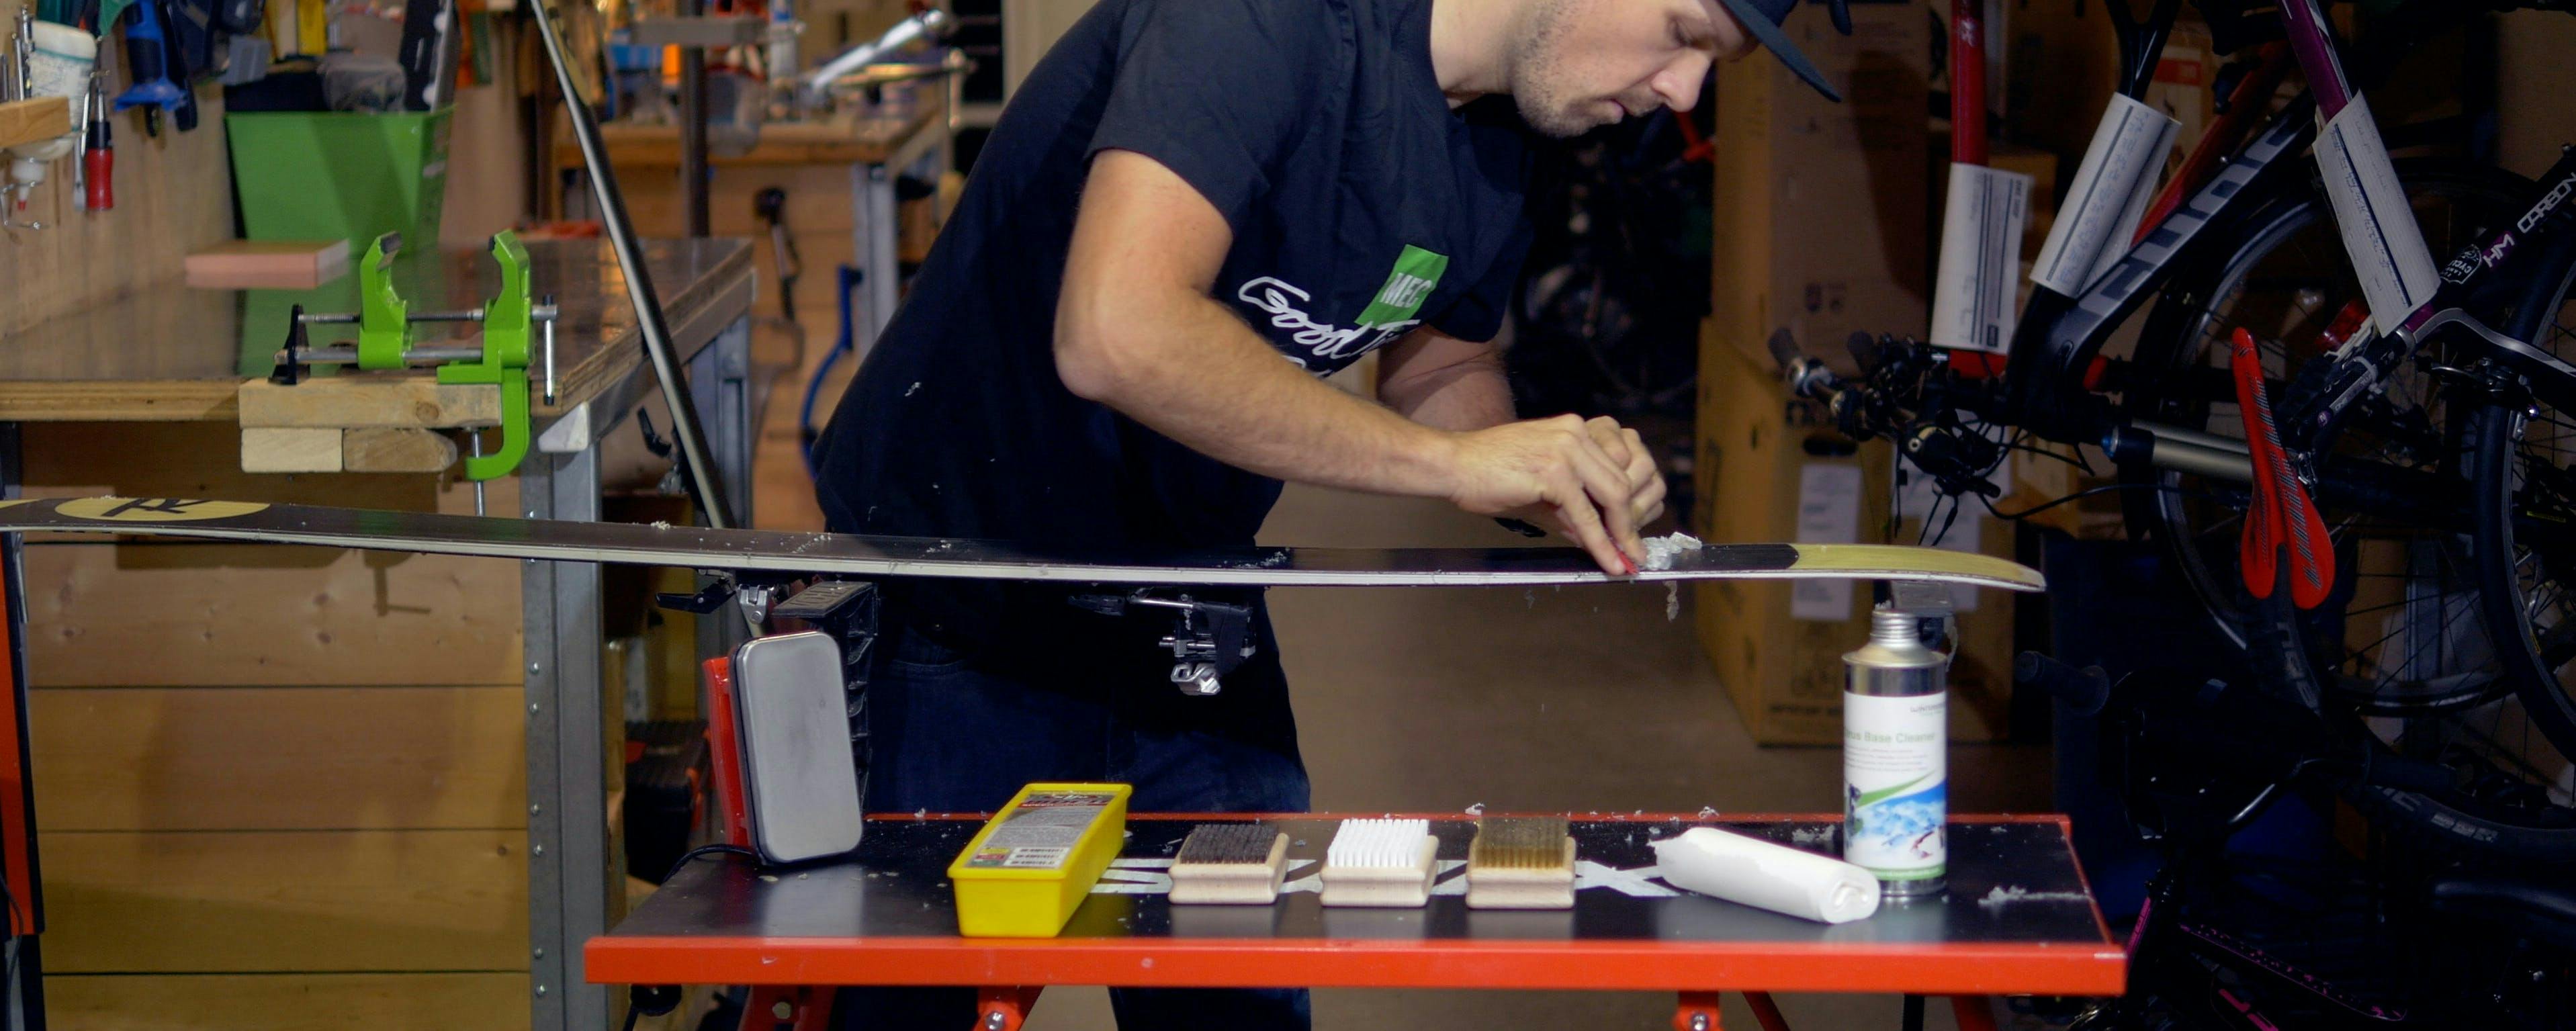 How to wax skis and snowboards